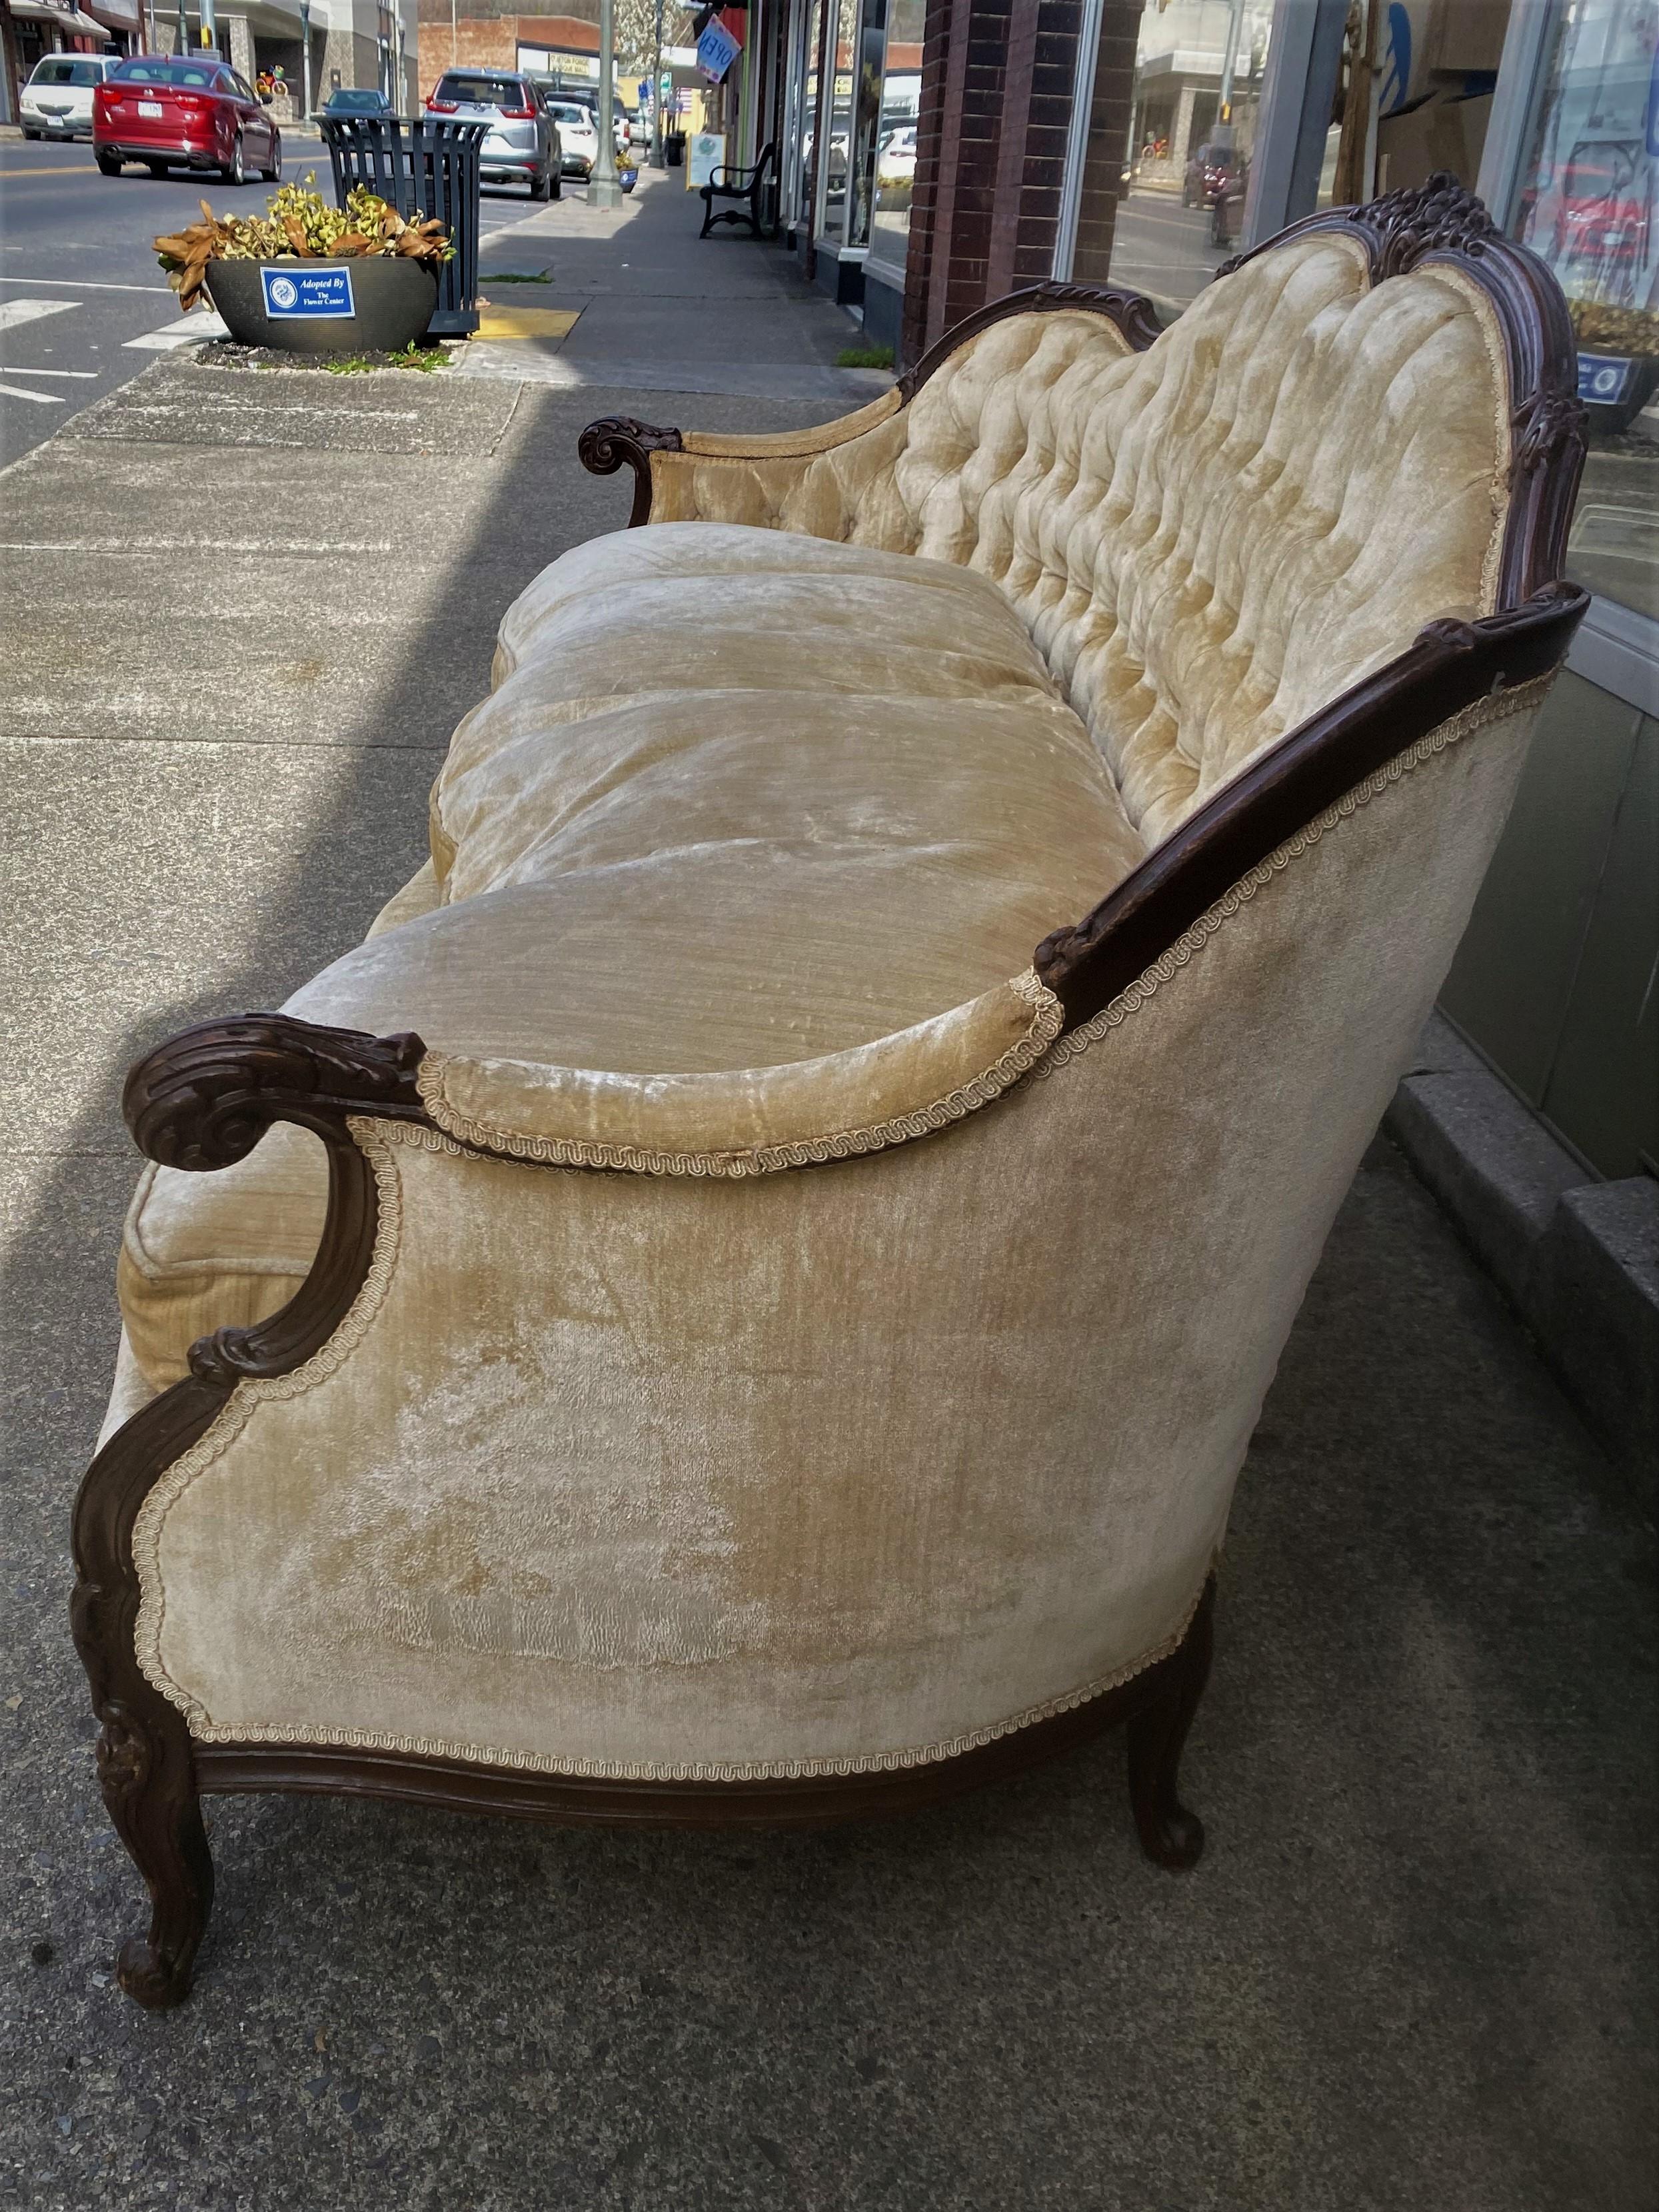 This is a lovely settee with carved dark wood framing the pale beige velvet upholstery and down cushions. Although the upholstery is warm and comfy, it is not in perfect shape, it has creases, stains from furniture stain and a small tear. Someone